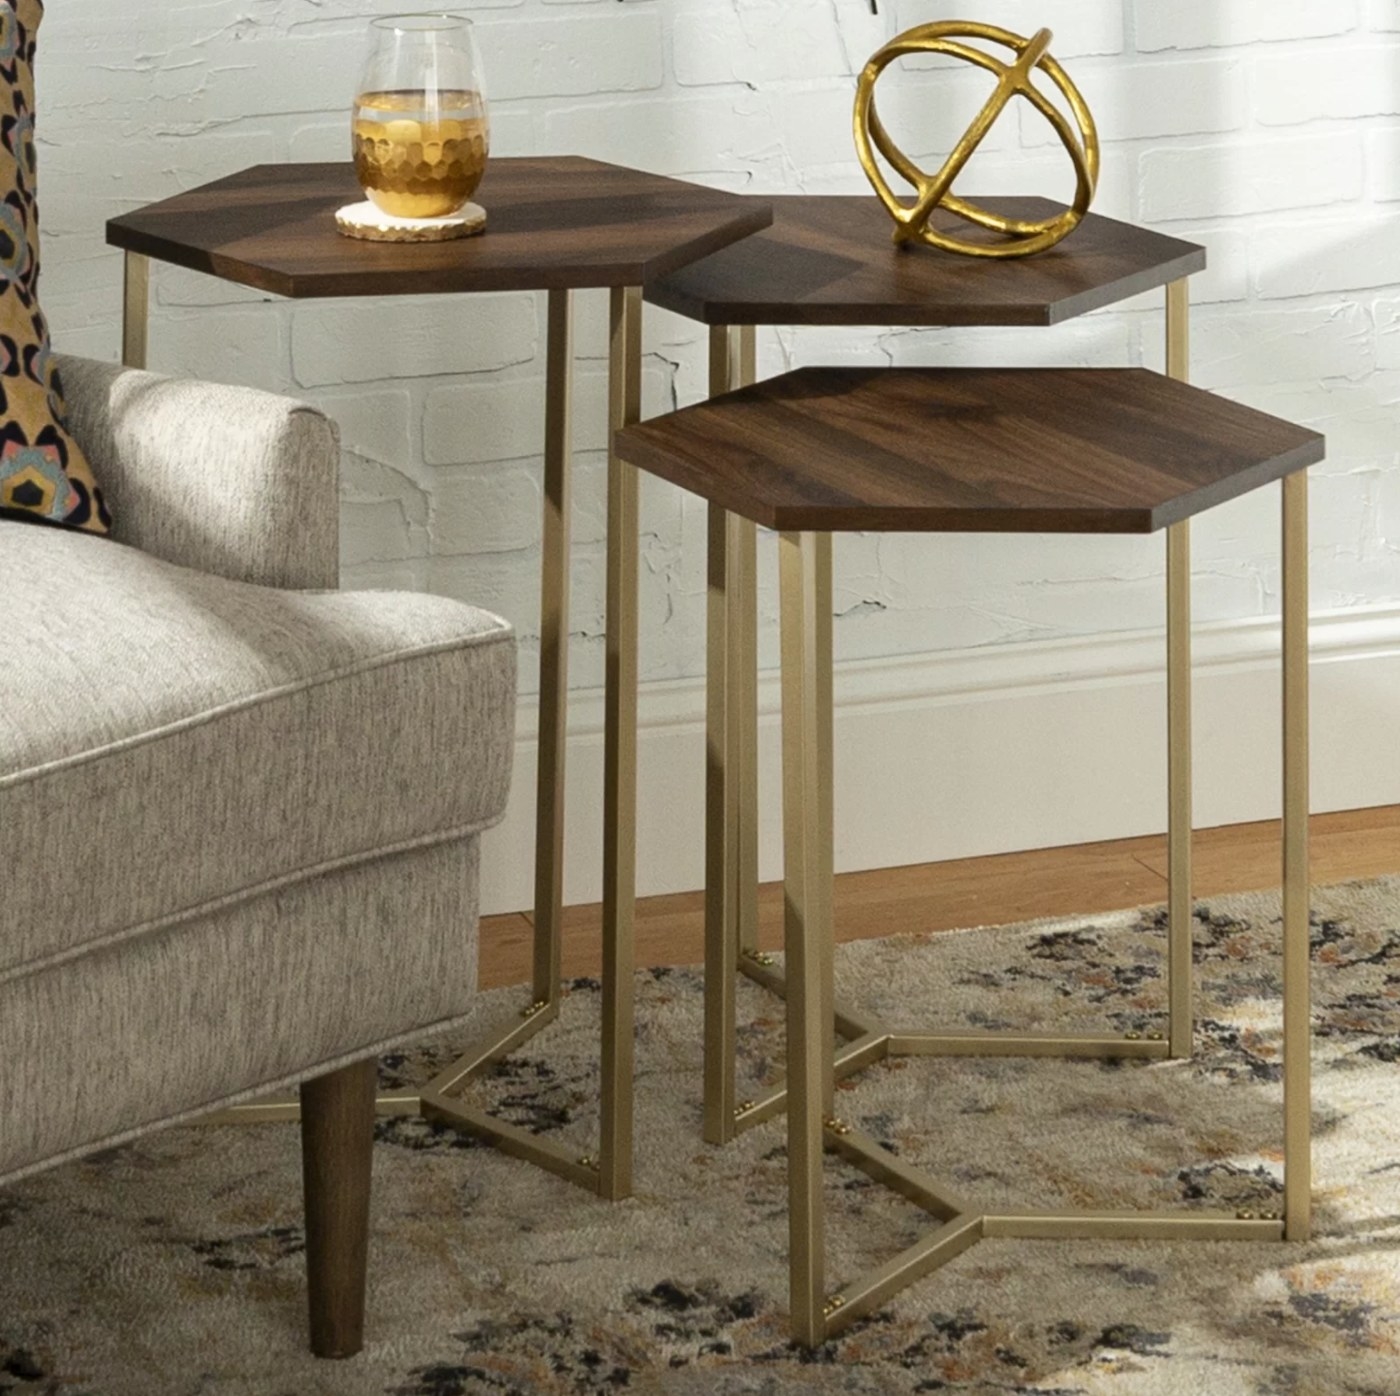 The nesting table in dark walnut/ gold holding a drinking glass and gold statue